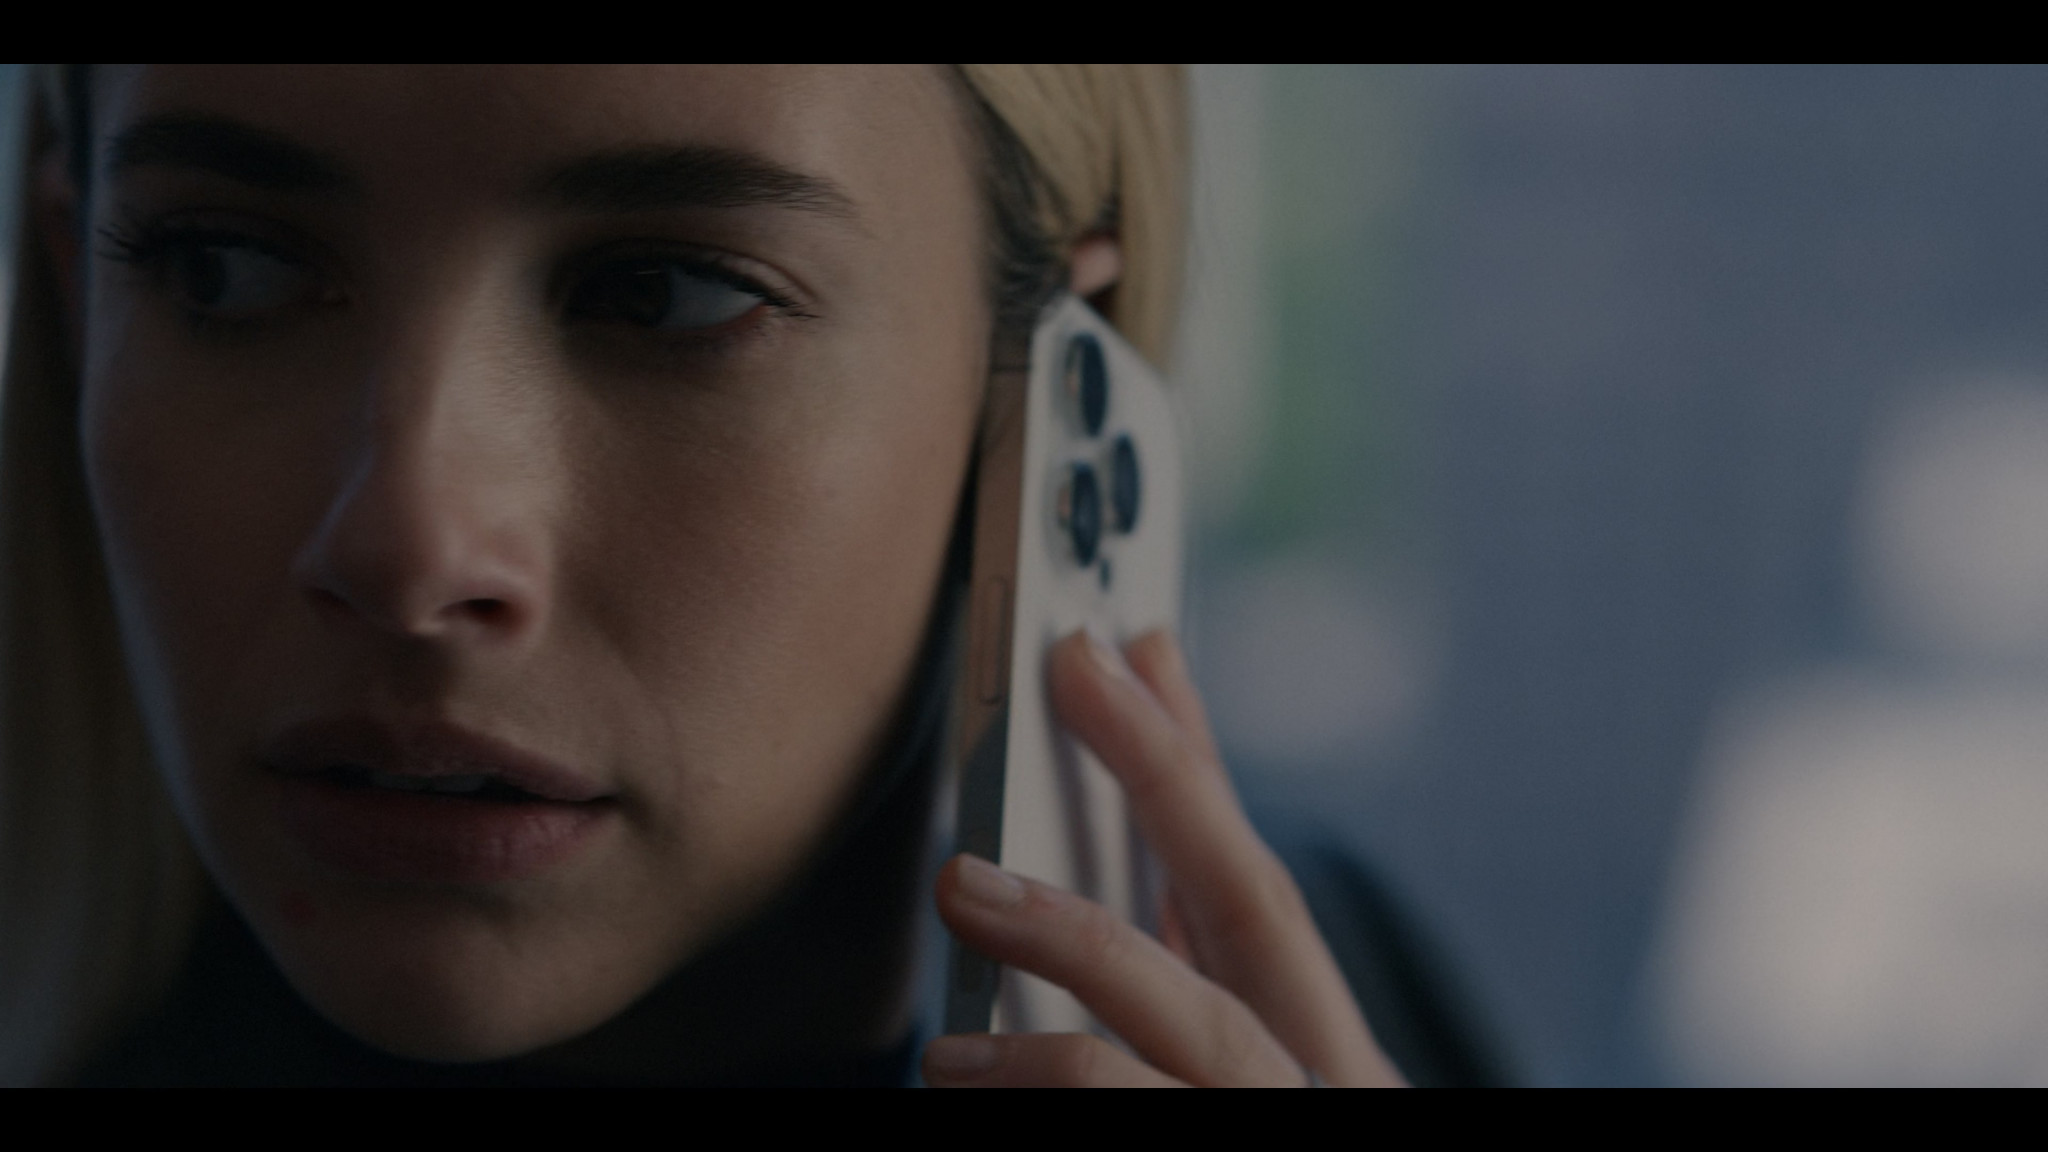 Apple Iphone Smartphone Of Emma Roberts As Anna Victoria Alcott In American Horror Story 